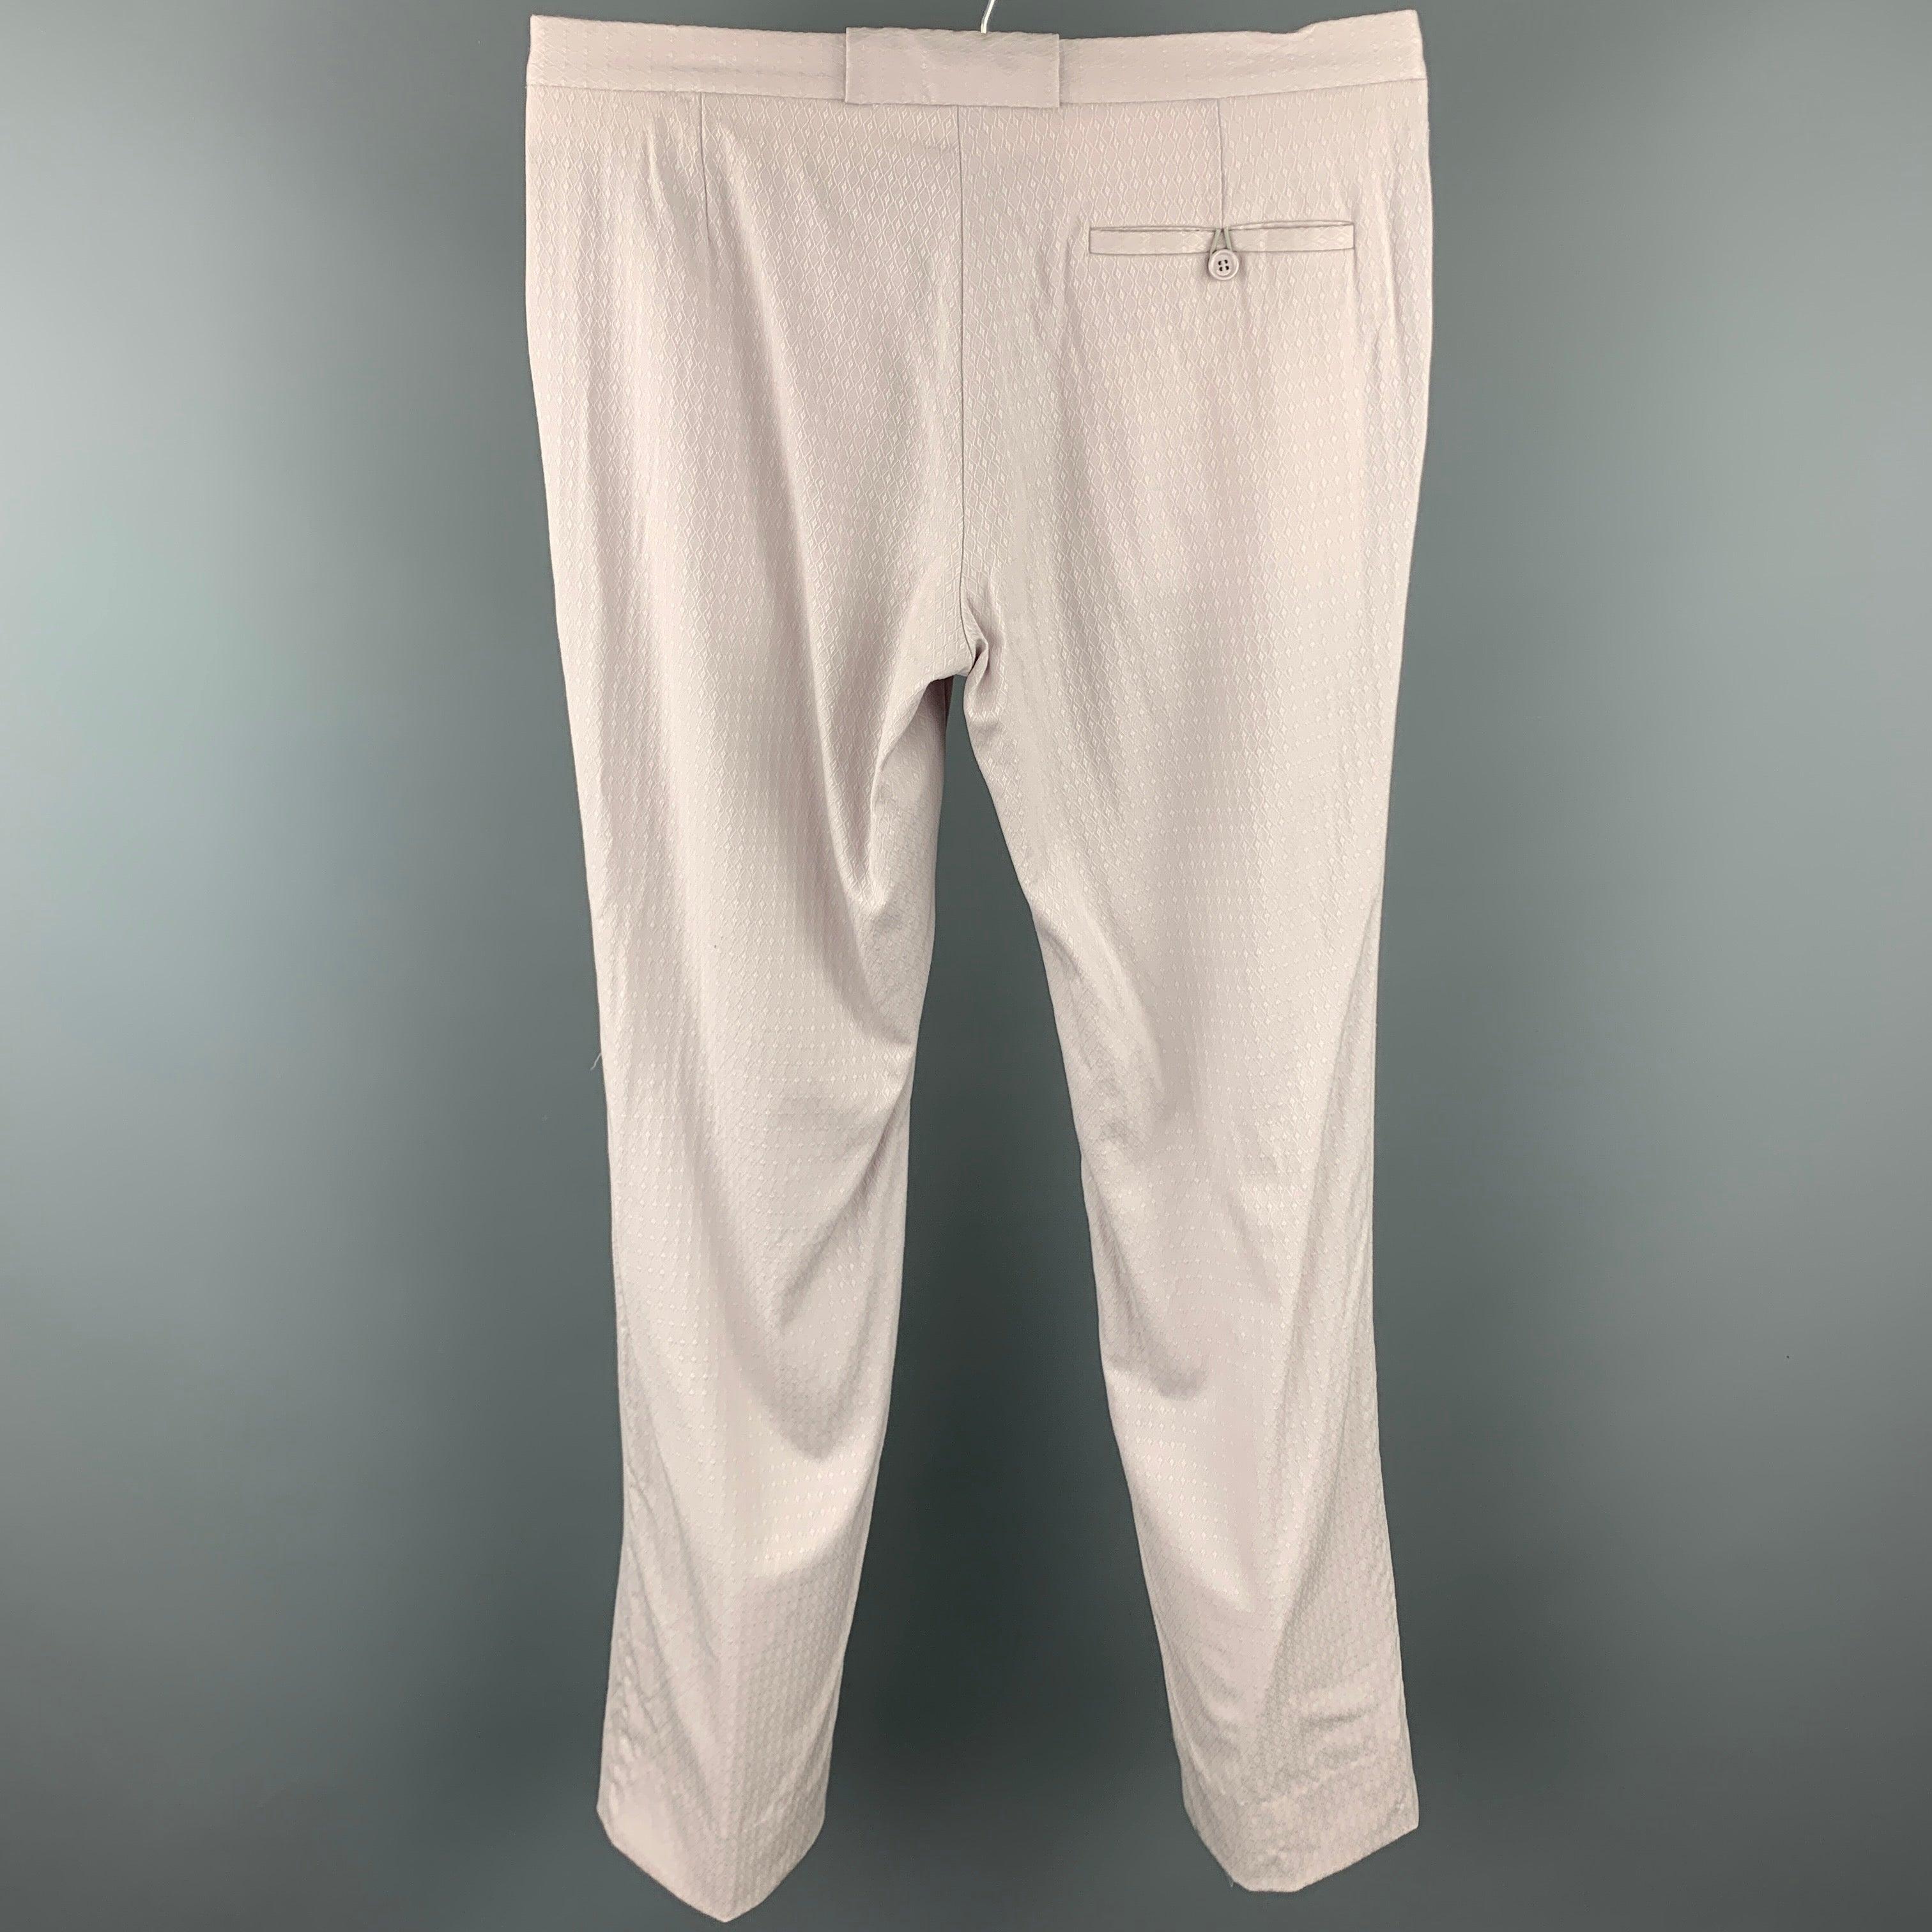 MIU MIU dress pants comes in a lavender textured cotton featuring a flat front, front tab, and a zip fly closure.Good
 Pre-Owned Condition. 
 

 Marked:  No fabric tag 
 

 Measurements: 
  Waist: 33 inches Rise: 9.5 inches Inseam: 34 inches Leg